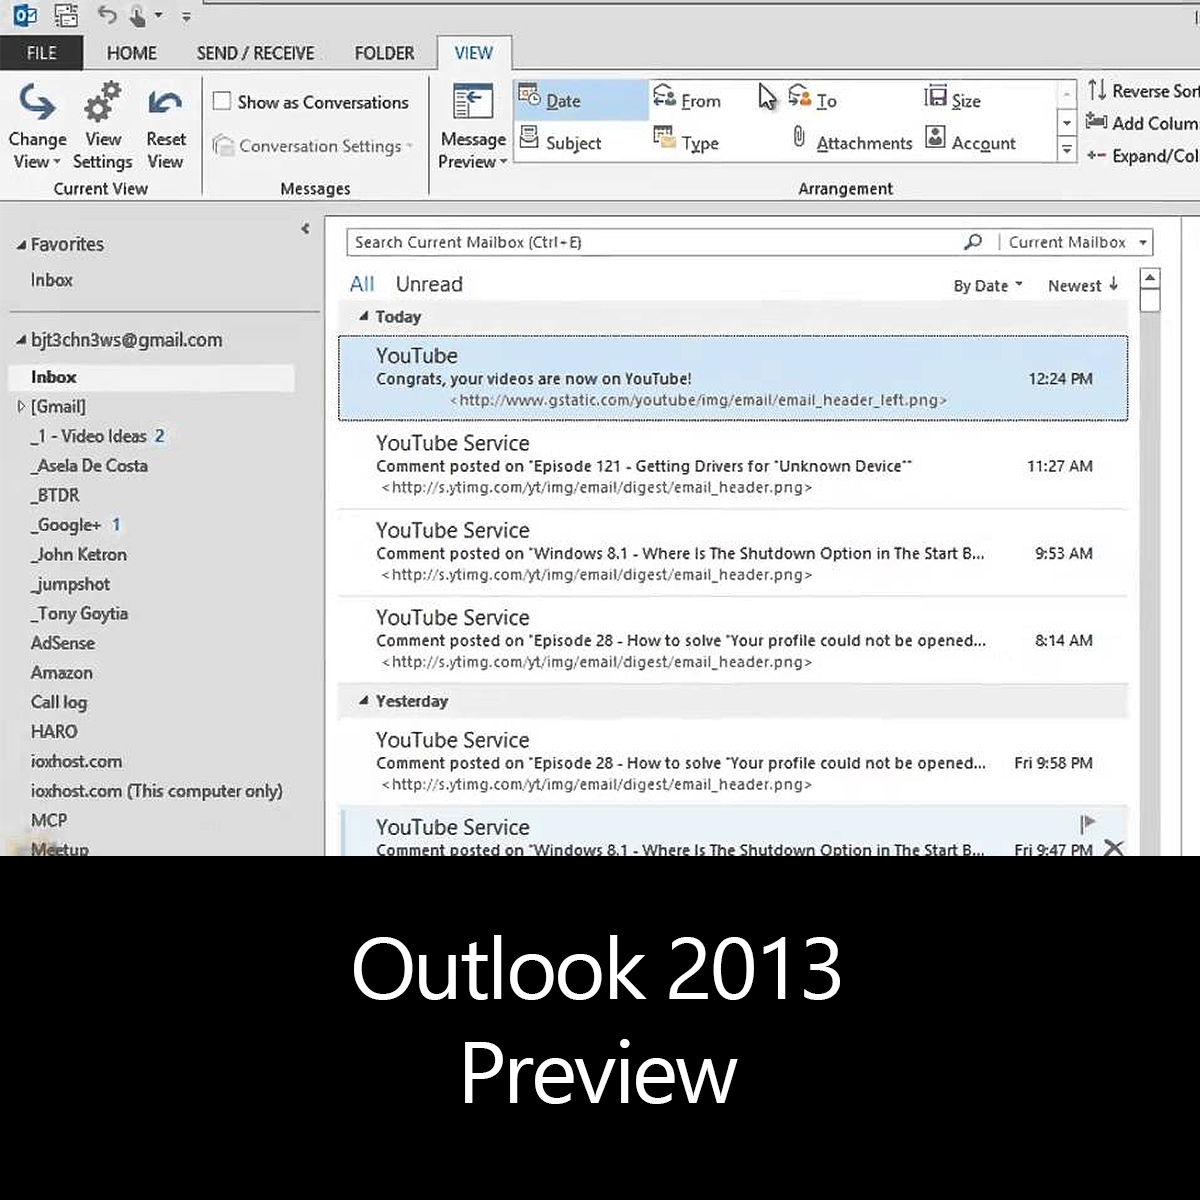 Outlook 2013 Preview